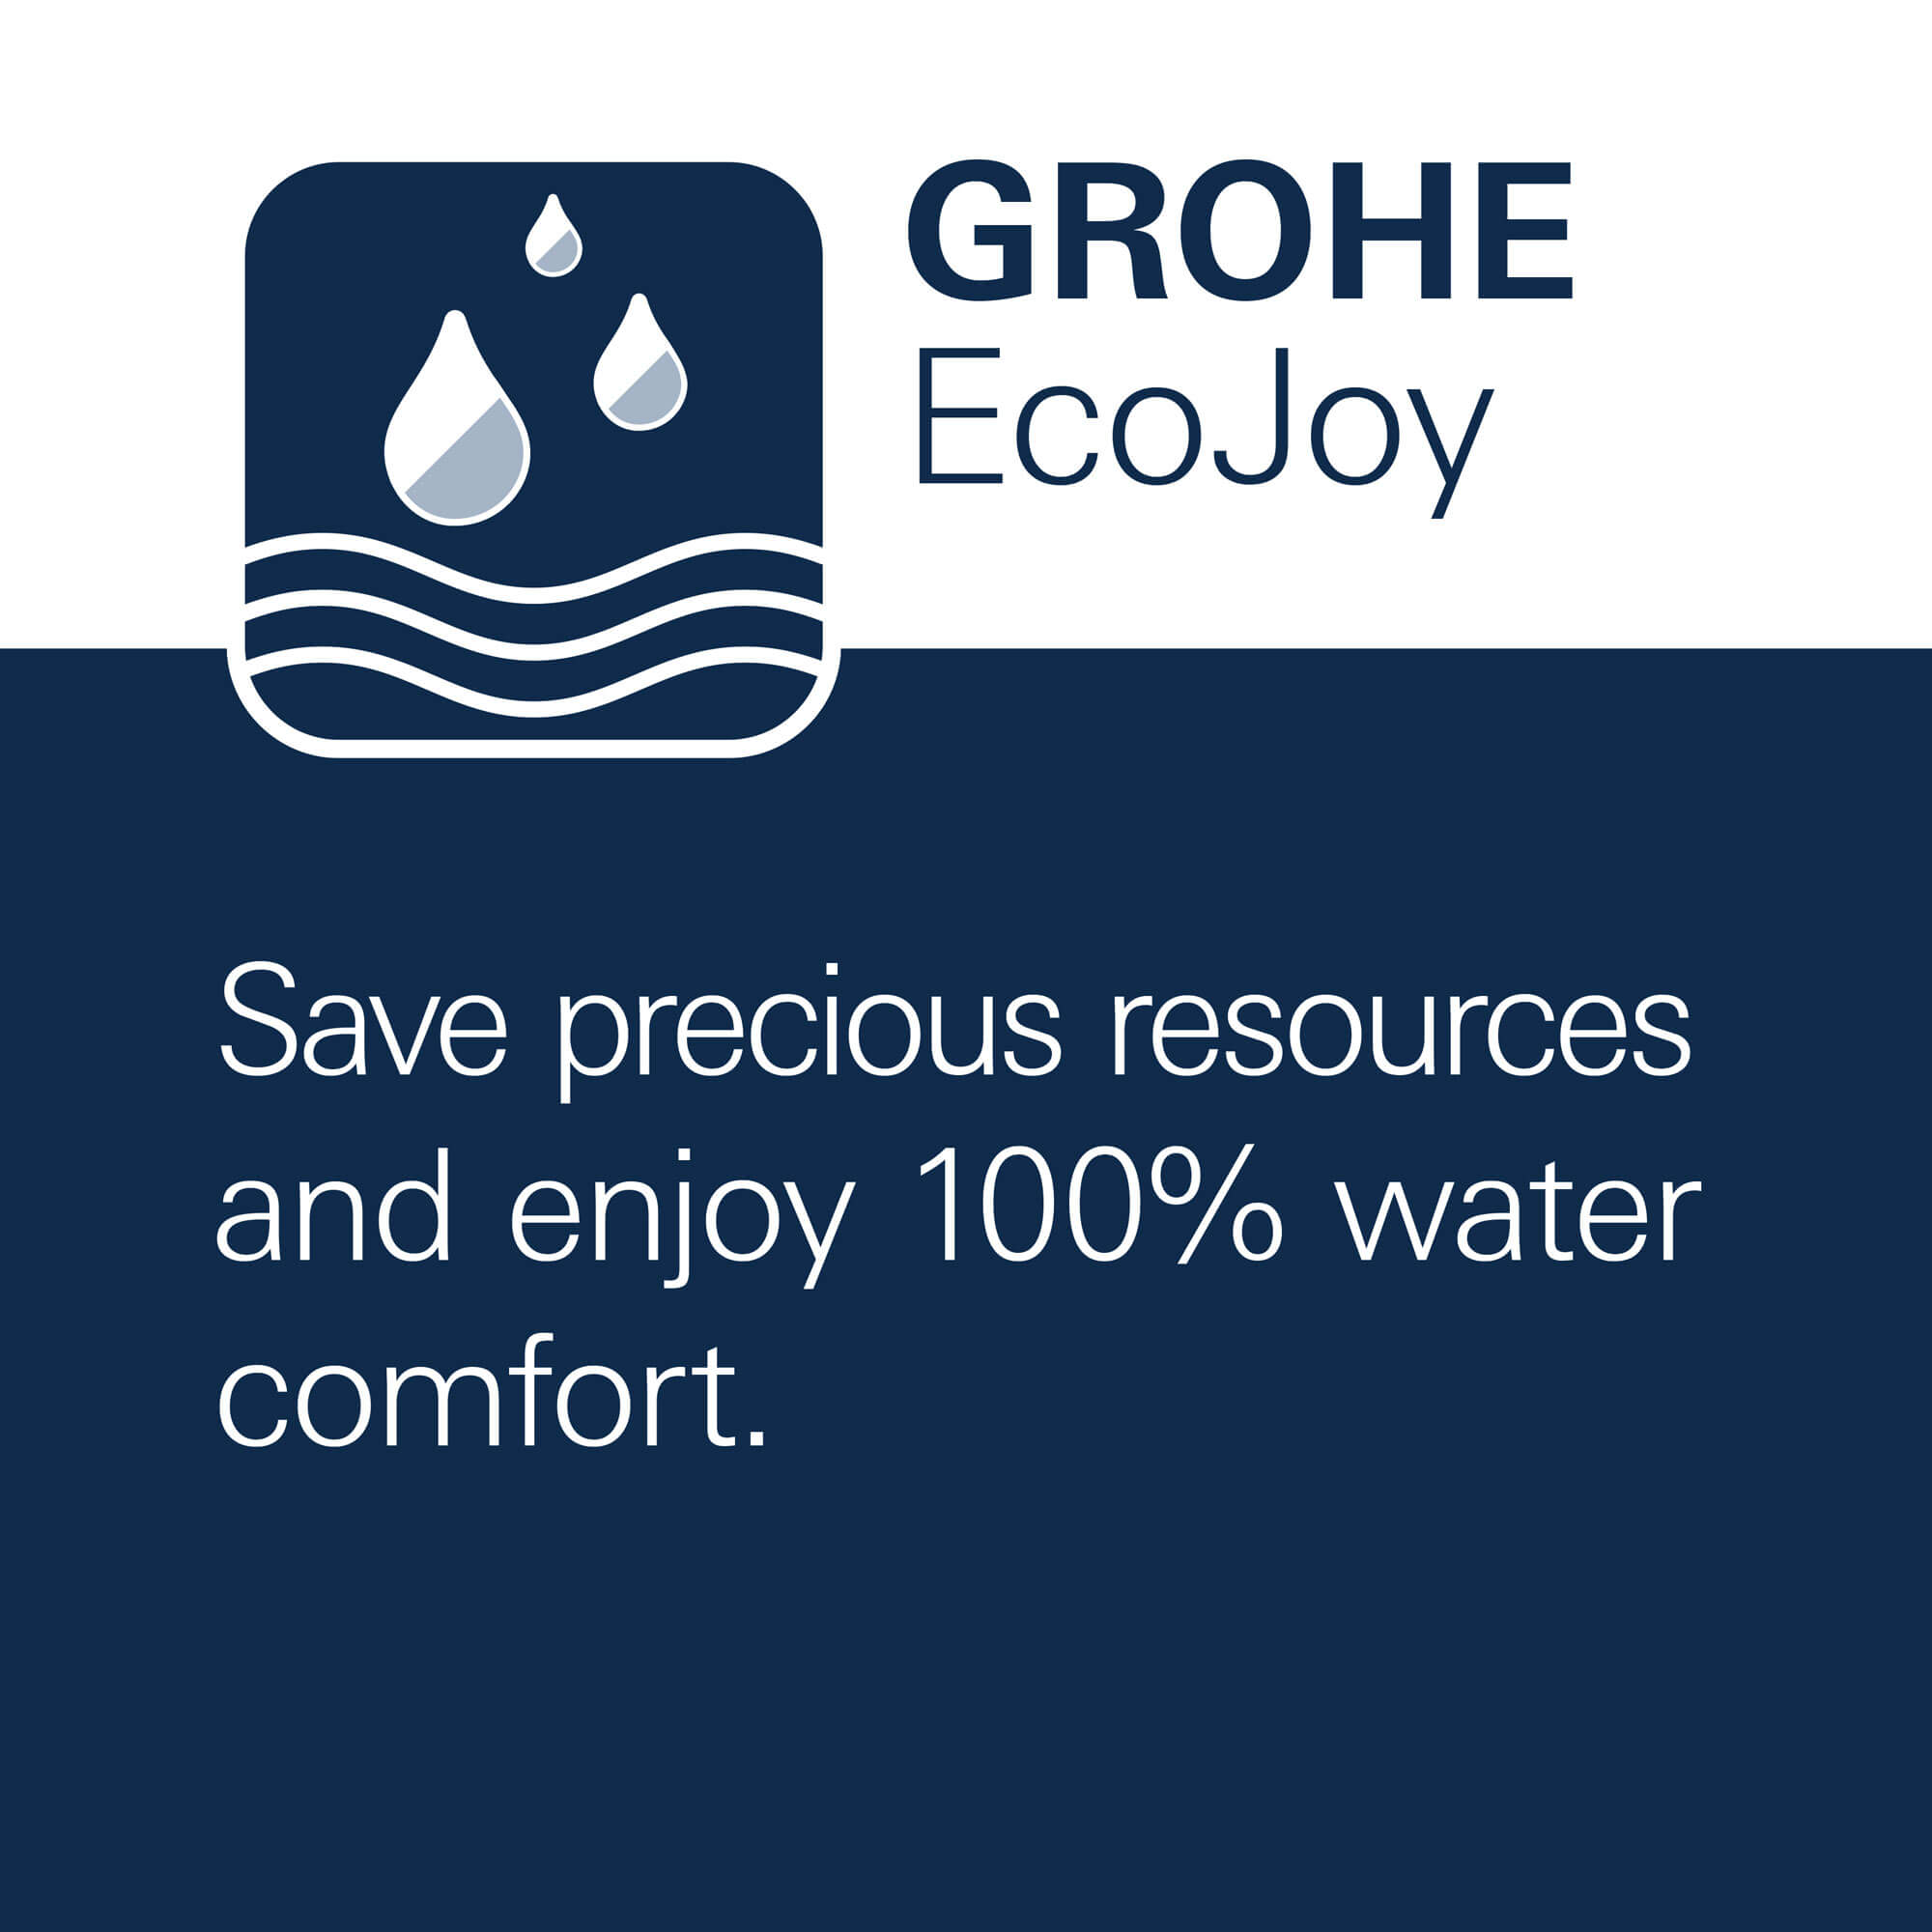 GROHE EcoJoy - Save precious resources and enjoy 100% water comfort.